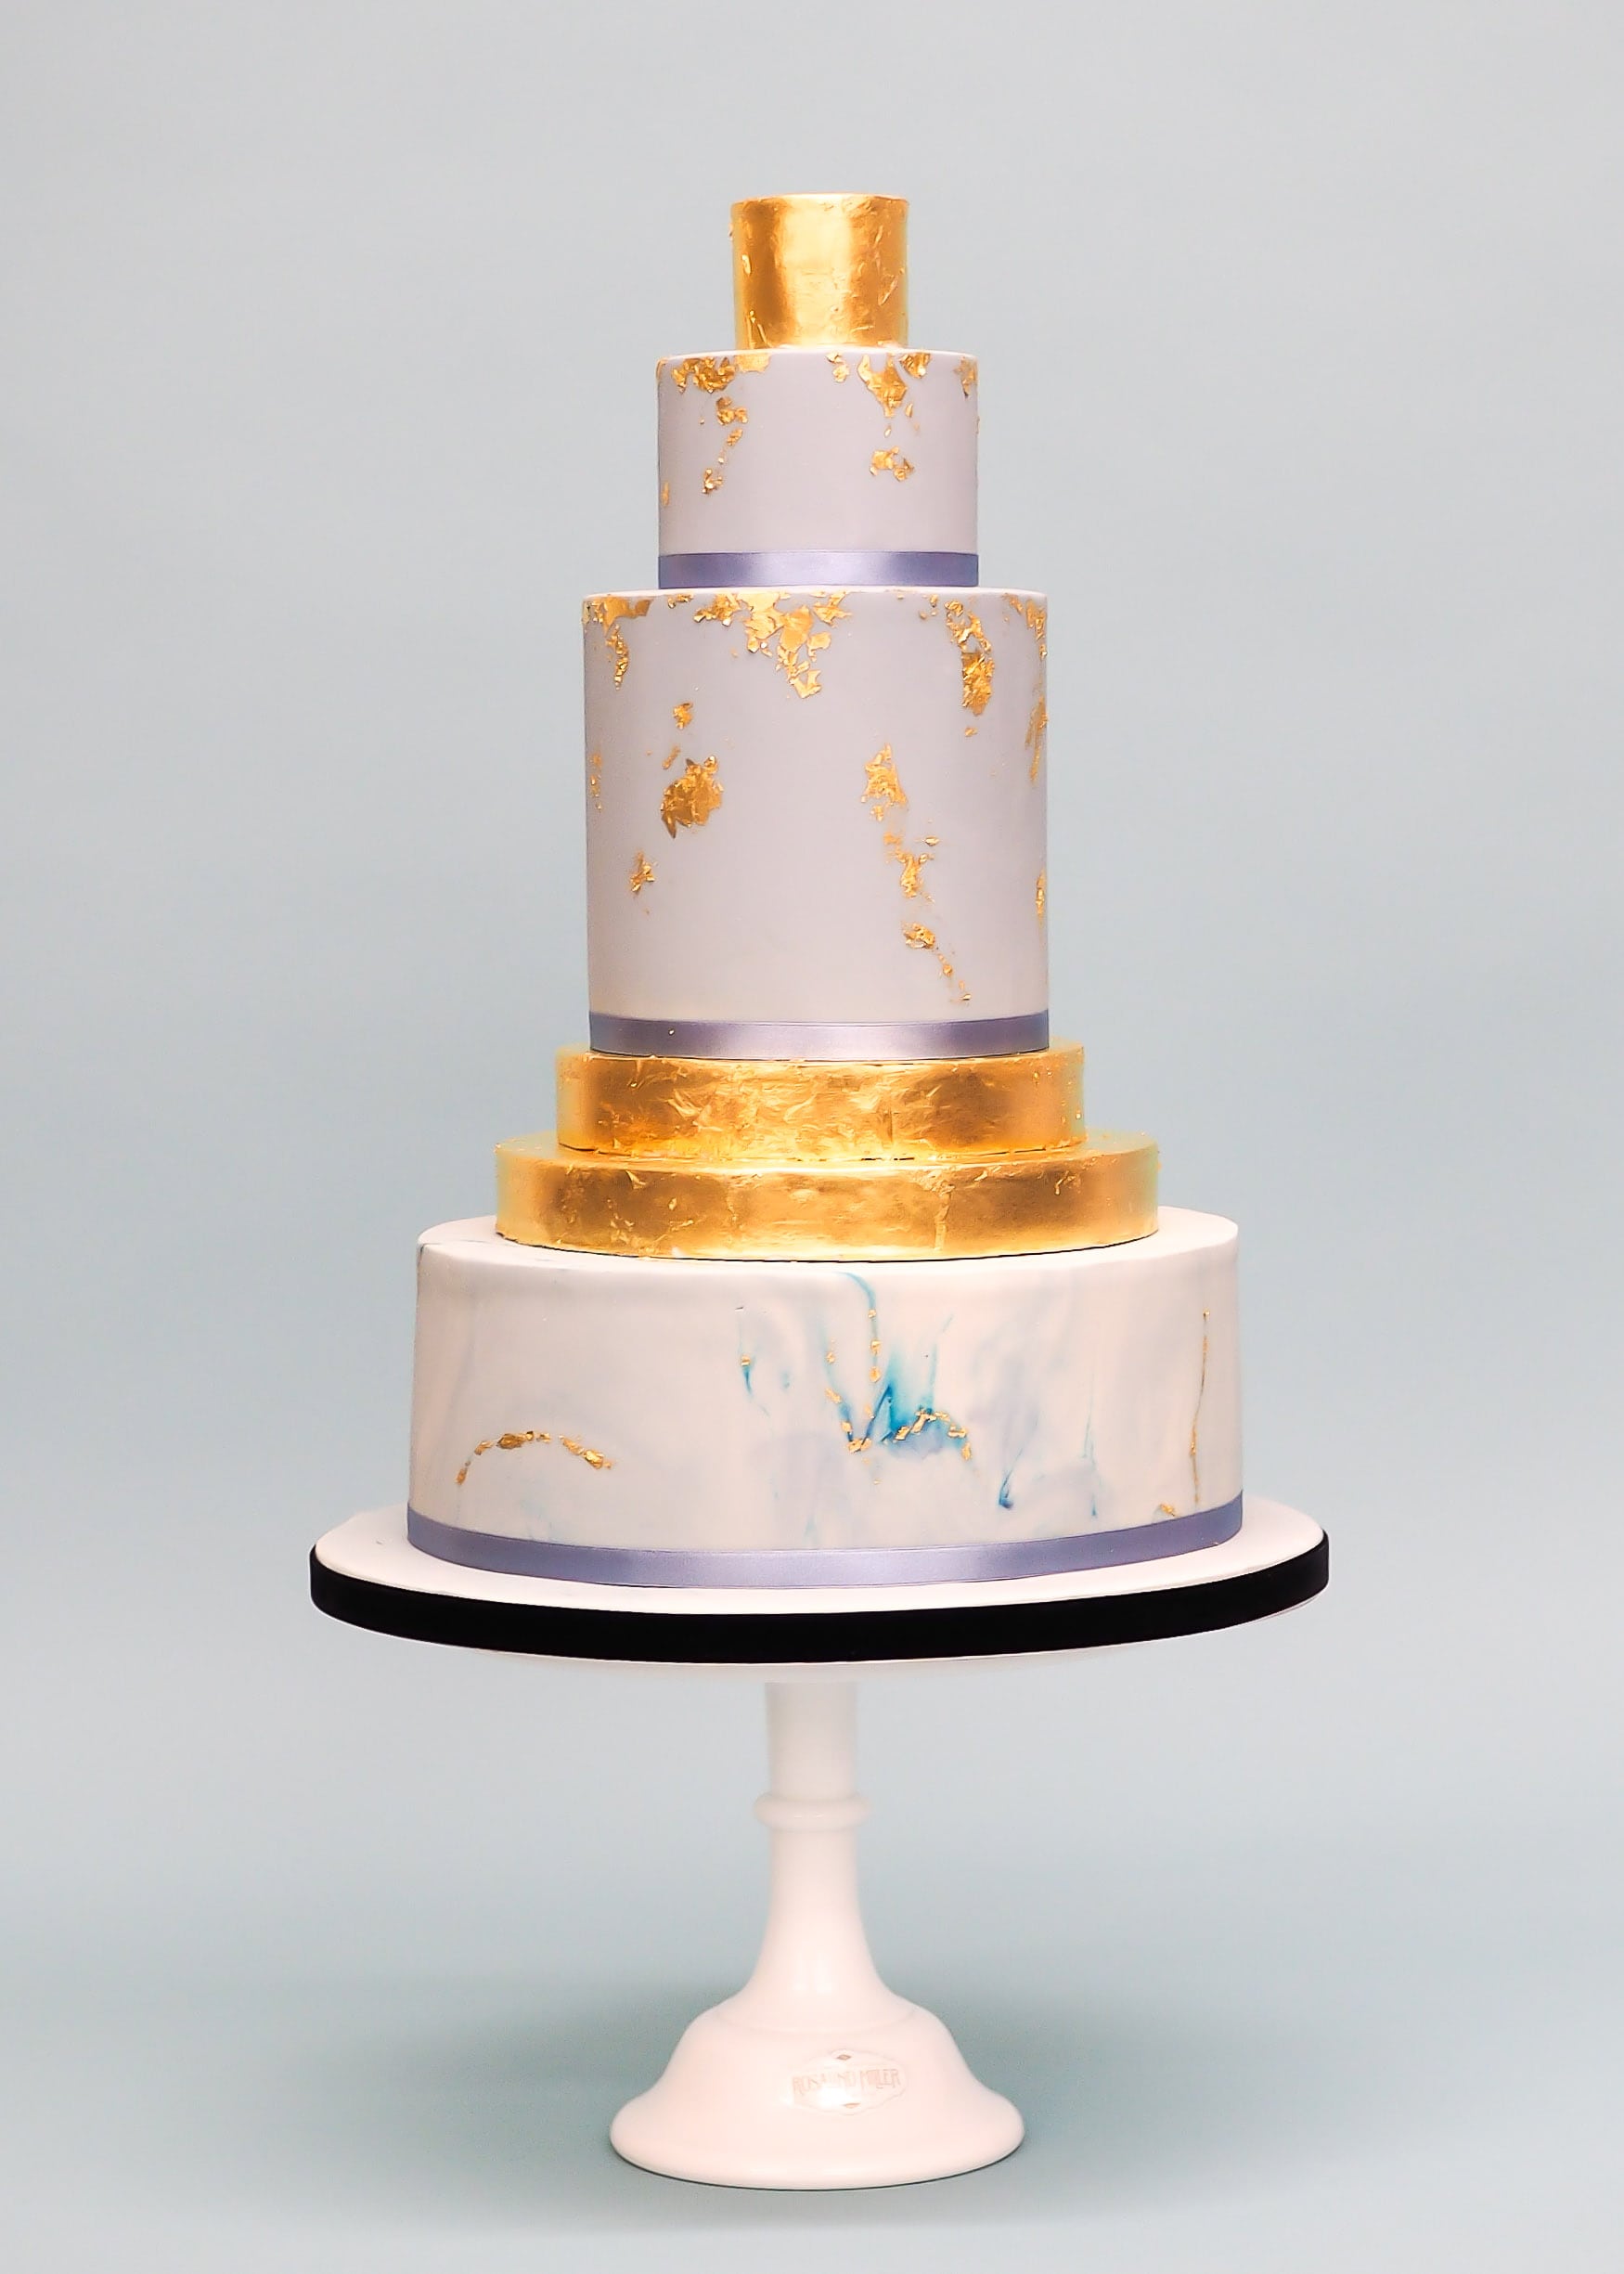 Blue and Gold Marbled with Gold Leaf Wedding Cake